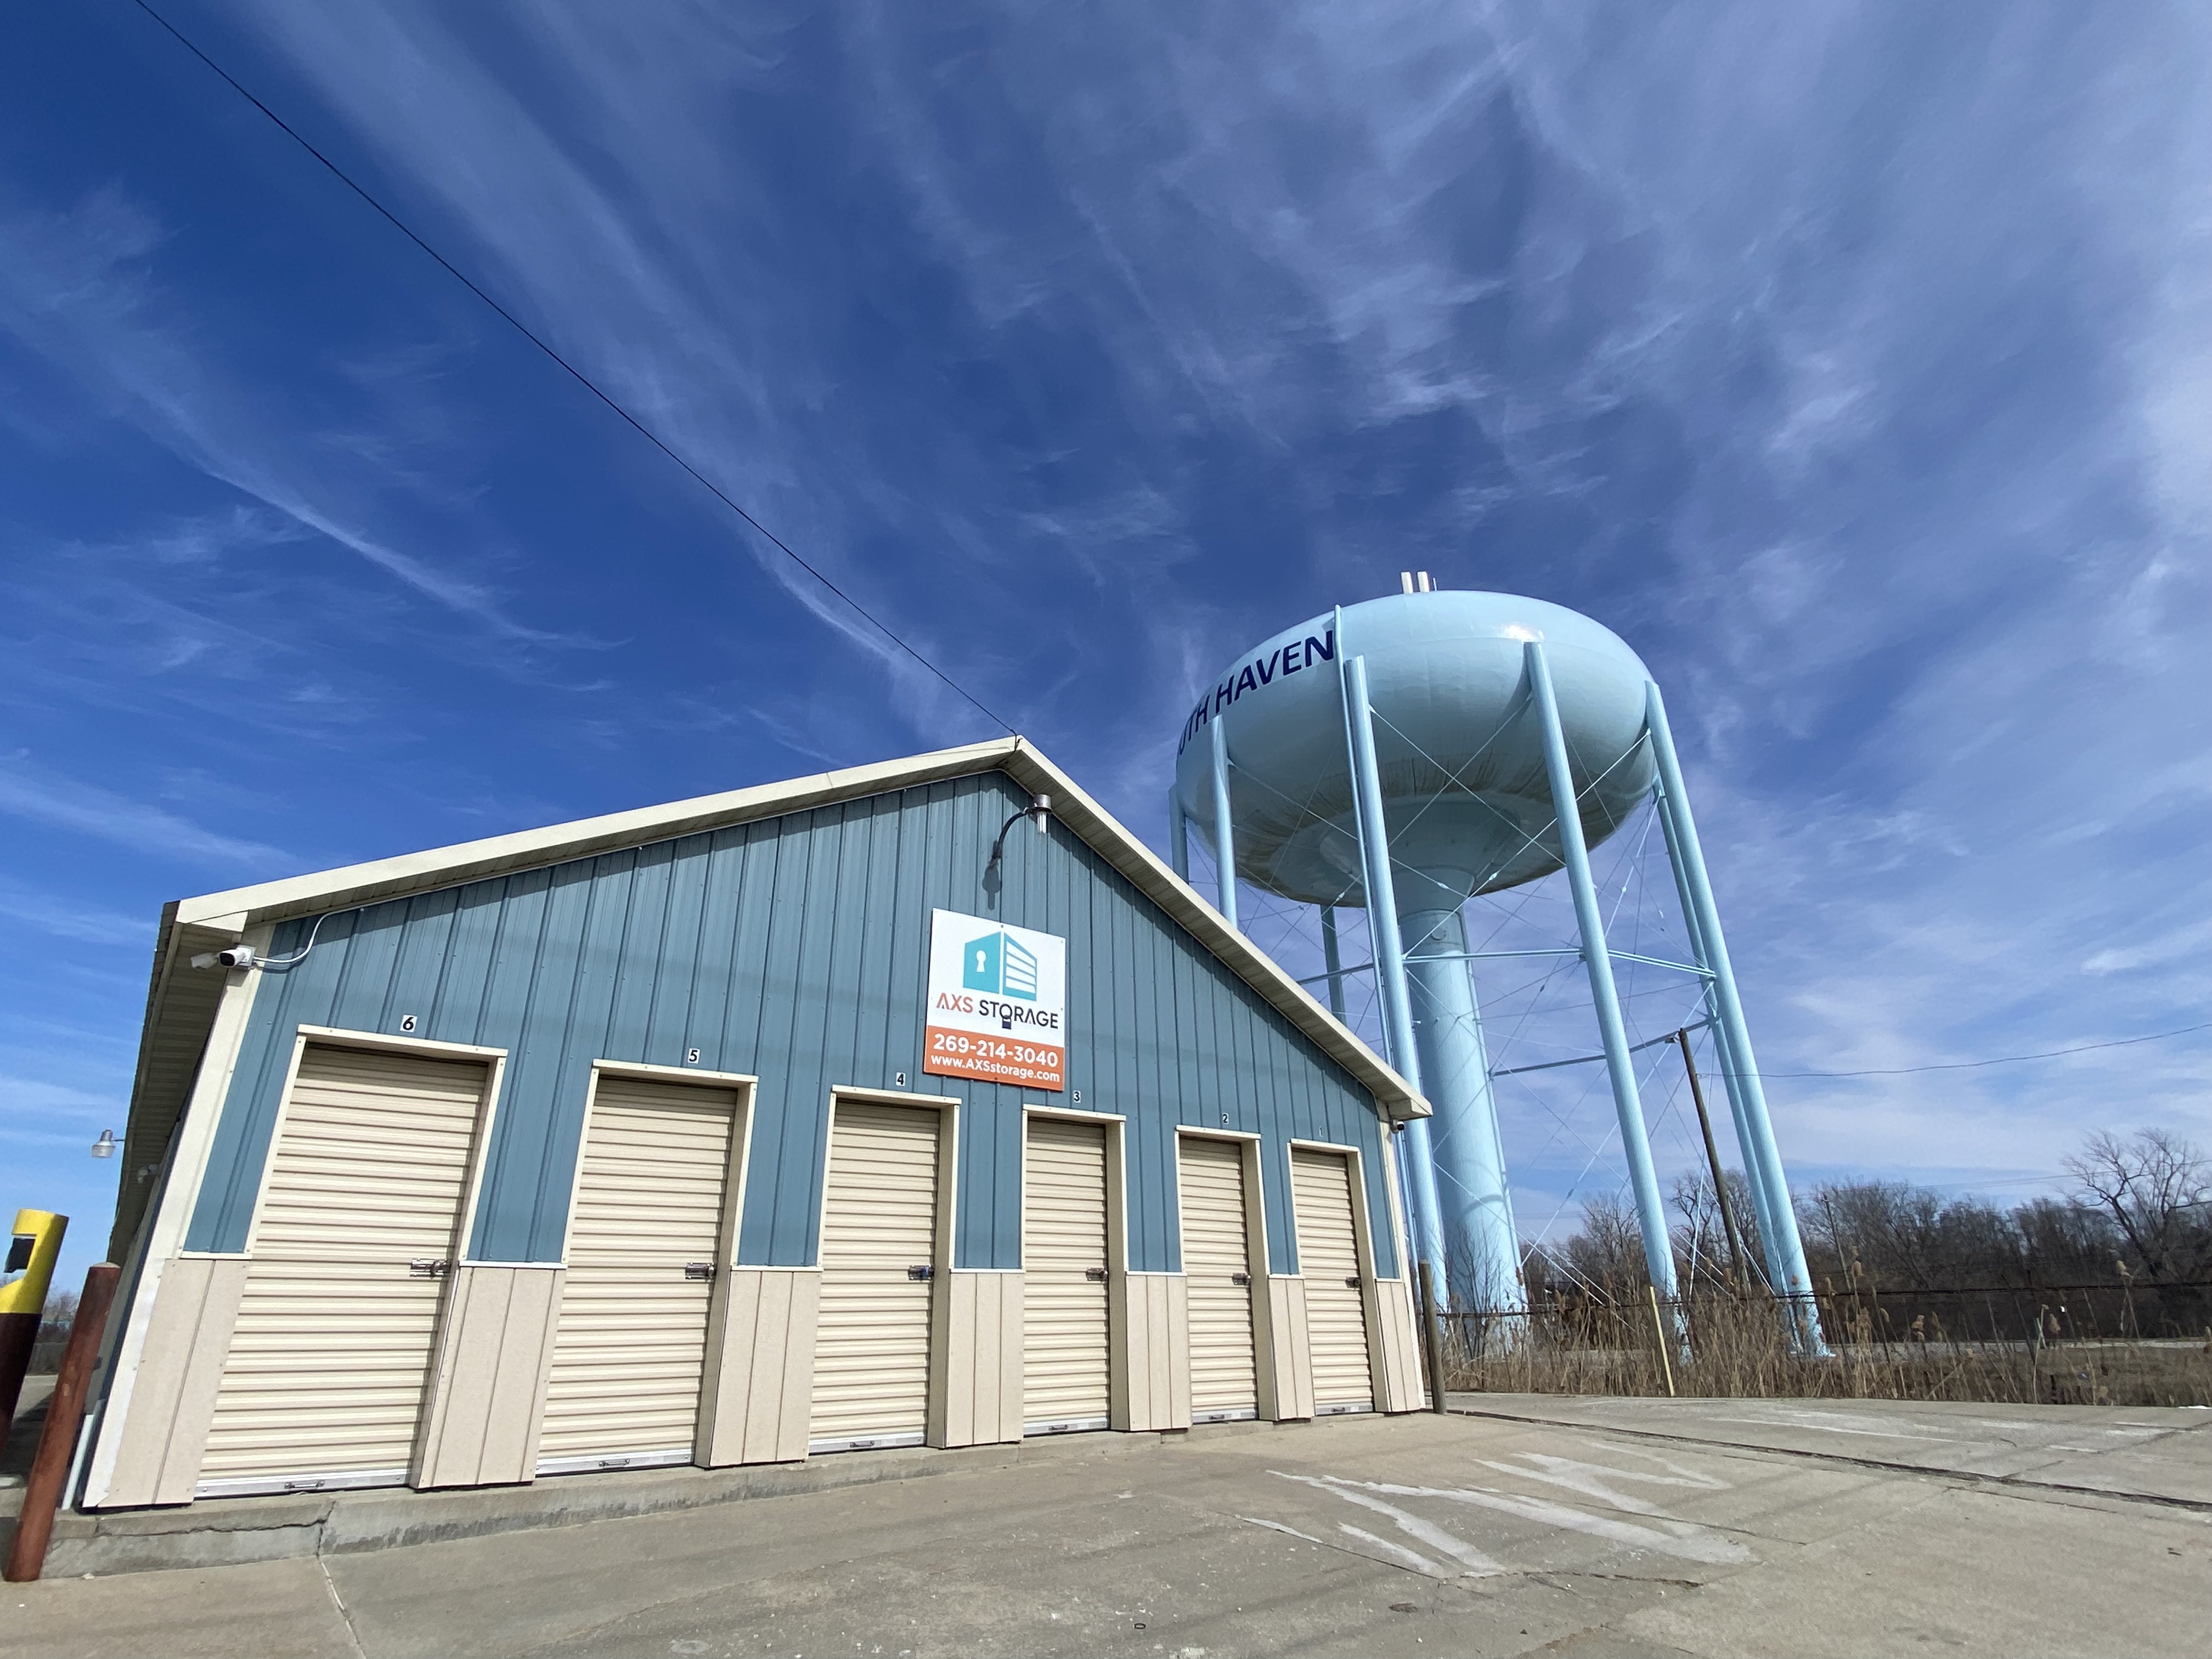 AXS Storage in South Haven, Michigan